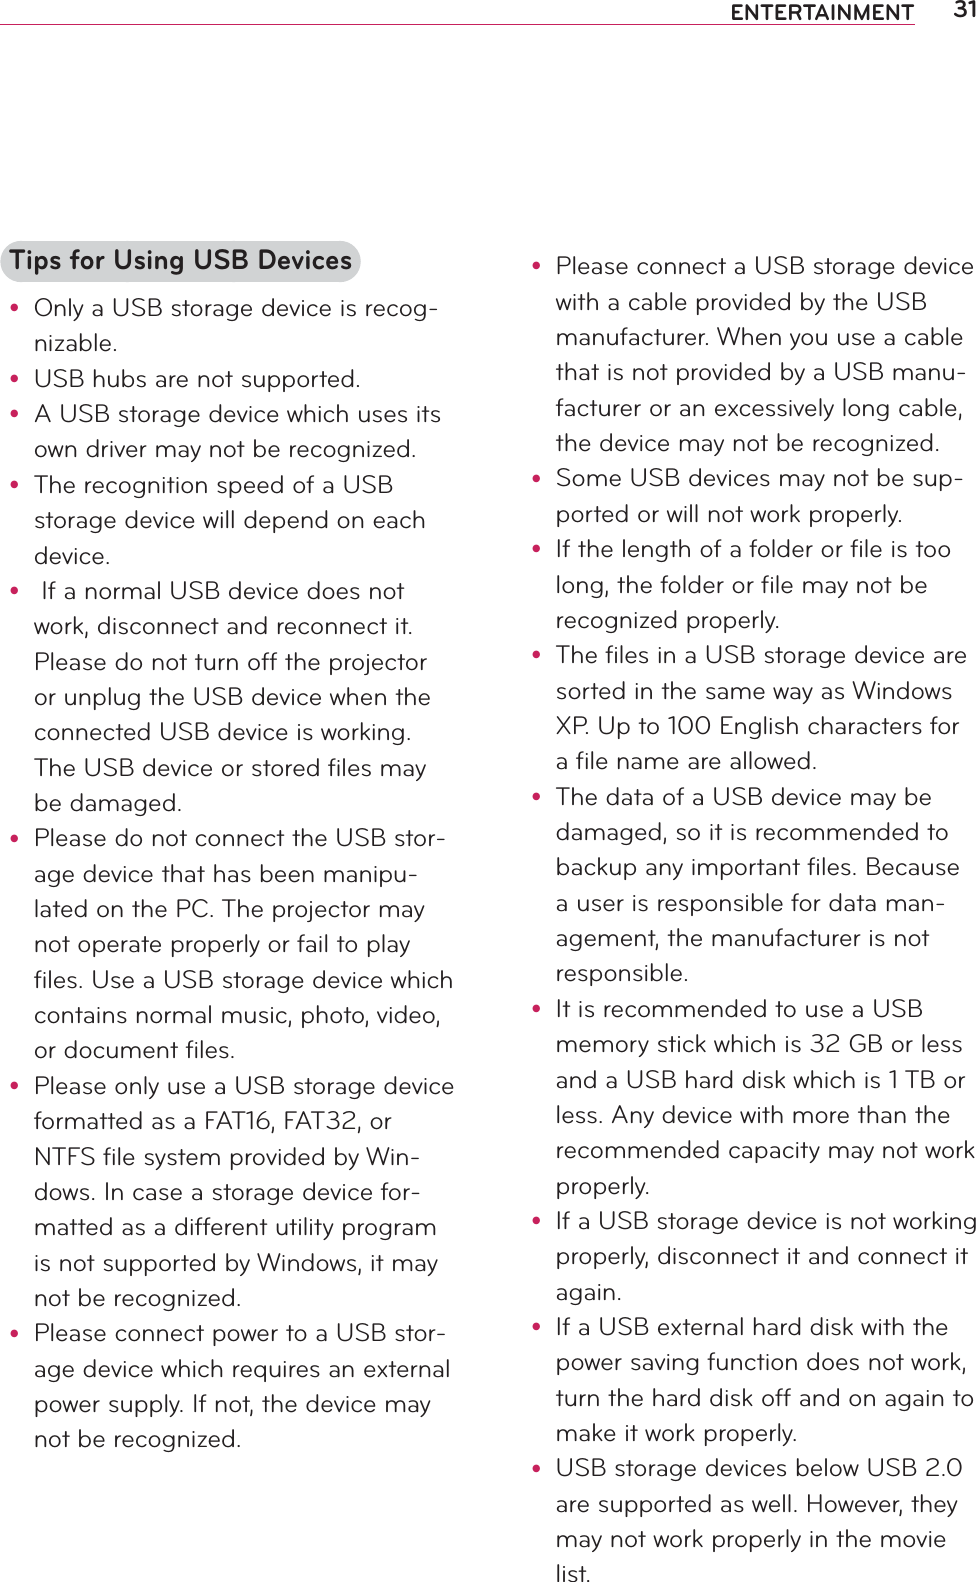 31ENTERTAINMENTTips for Using USB Devicesy Only a USB storage device is recog-nizable.y USB hubs are not supported.y A USB storage device which uses its own driver may not be recognized.y The recognition speed of a USB storage device will depend on each device.y  If a normal USB device does not work, disconnect and reconnect it. Please do not turn off the projector or unplug the USB device when the connected USB device is working. The USB device or stored files may be damaged.y Please do not connect the USB stor-age device that has been manipu-lated on the PC. The projector may not operate properly or fail to play files. Use a USB storage device which contains normal music, photo, video, or document files.y Please only use a USB storage device formatted as a FAT16, FAT32, or NTFS file system provided by Win-dows. In case a storage device for-matted as a different utility program is not supported by Windows, it may not be recognized.y Please connect power to a USB stor-age device which requires an external power supply. If not, the device may not be recognized.y Please connect a USB storage device with a cable provided by the USB manufacturer. When you use a cable that is not provided by a USB manu-facturer or an excessively long cable, the device may not be recognized.y Some USB devices may not be sup-ported or will not work properly.y If the length of a folder or file is too long, the folder or file may not be recognized properly.y The files in a USB storage device are sorted in the same way as Windows XP. Up to 100 English characters for a file name are allowed.y The data of a USB device may be damaged, so it is recommended to backup any important files. Because a user is responsible for data man-agement, the manufacturer is not responsible.y It is recommended to use a USB memory stick which is 32 GB or less and a USB hard disk which is 1 TB or less. Any device with more than the recommended capacity may not work properly.y If a USB storage device is not working properly, disconnect it and connect it again.y If a USB external hard disk with the power saving function does not work, turn the hard disk off and on again to make it work properly.y USB storage devices below USB 2.0 are supported as well. However, they may not work properly in the movie list.